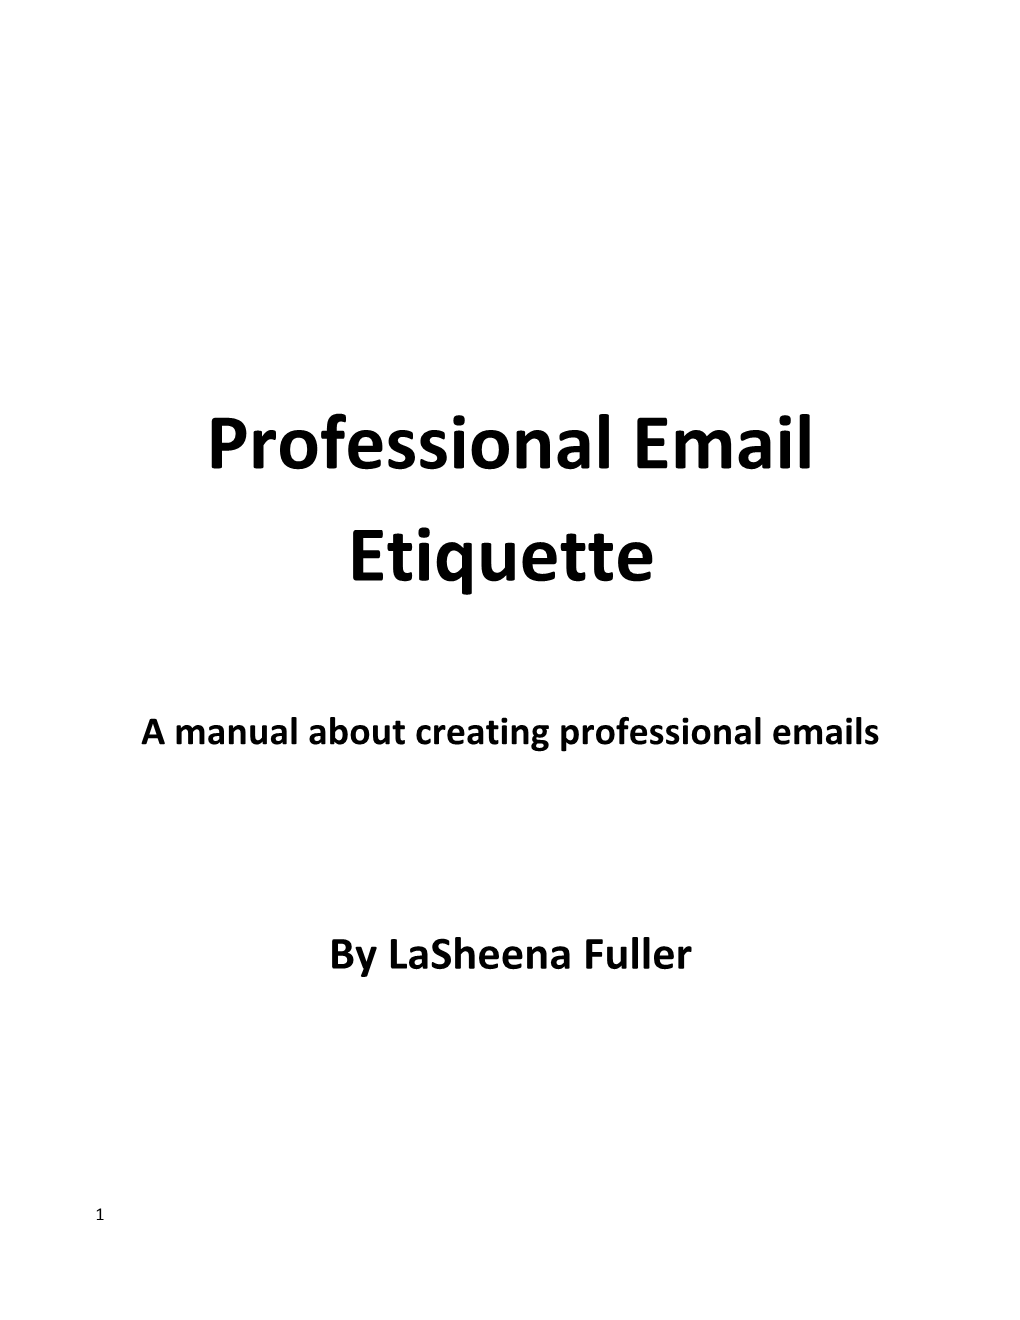 A Manual About Creating Professional Emails